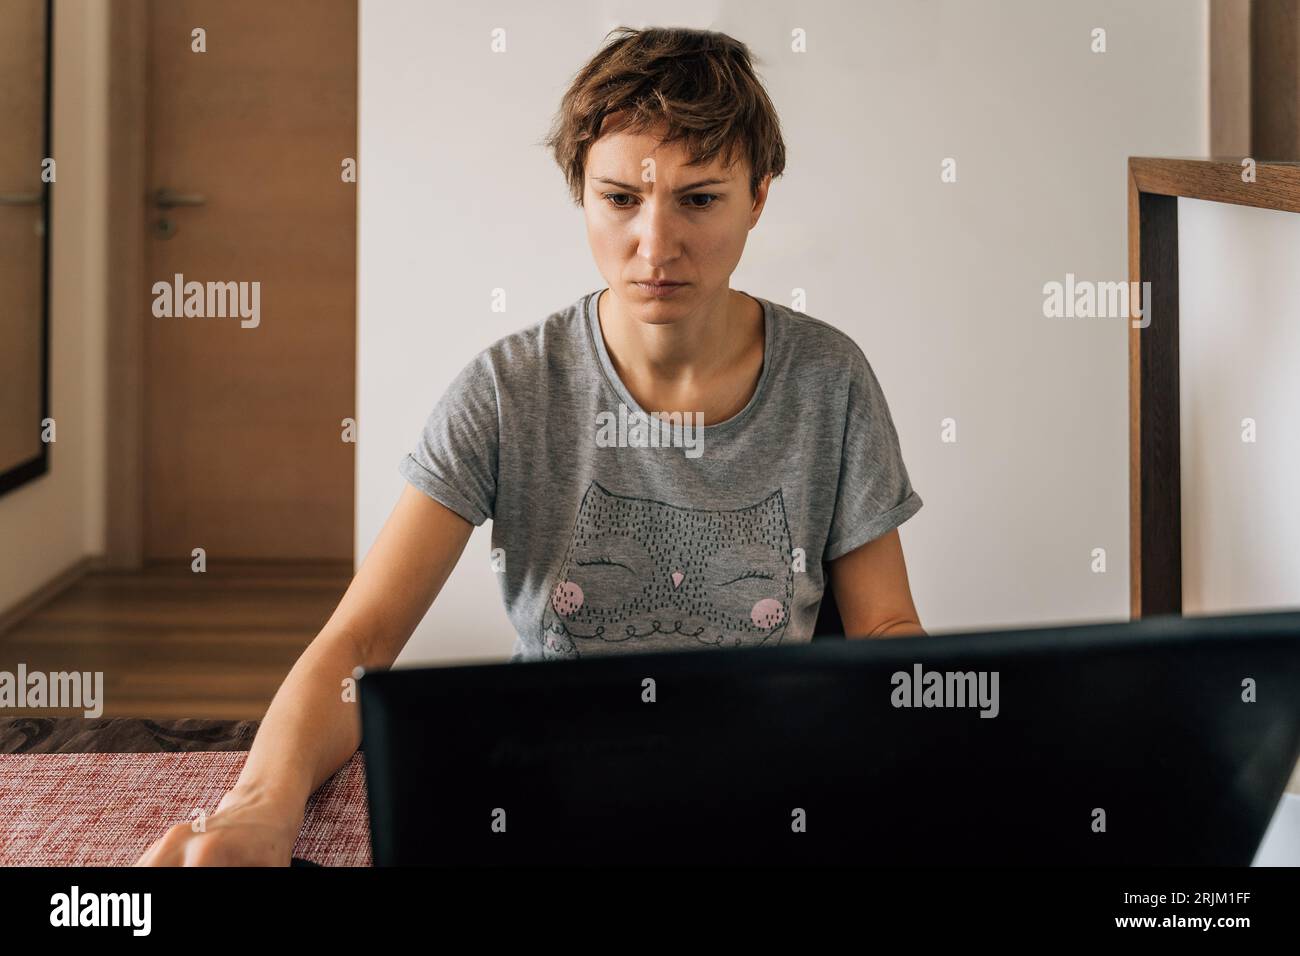 A woman in home clothes works at home at laptops with a tense look. Stock Photo